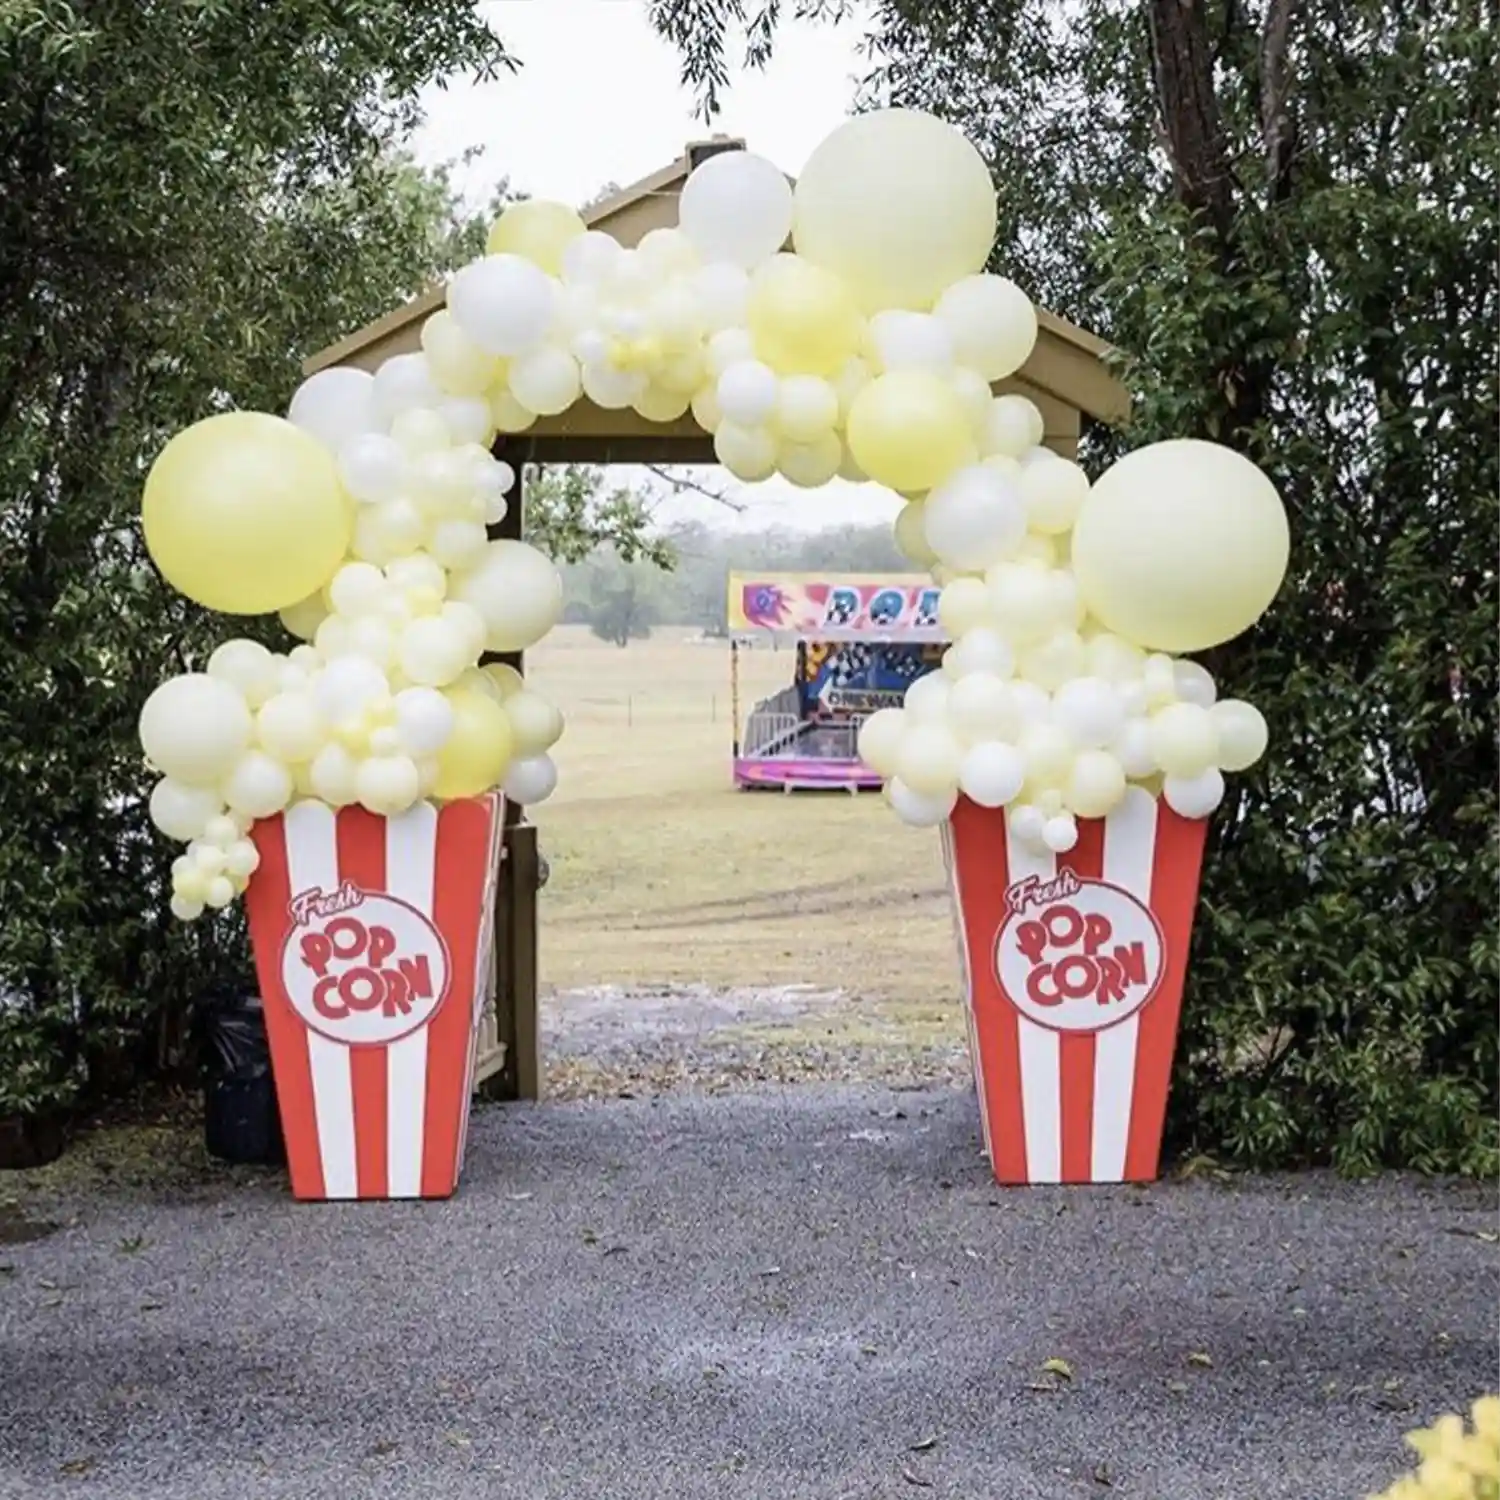 Carnival Party Ideas - Popcorn Balloon Carnival Entrance - source uknown